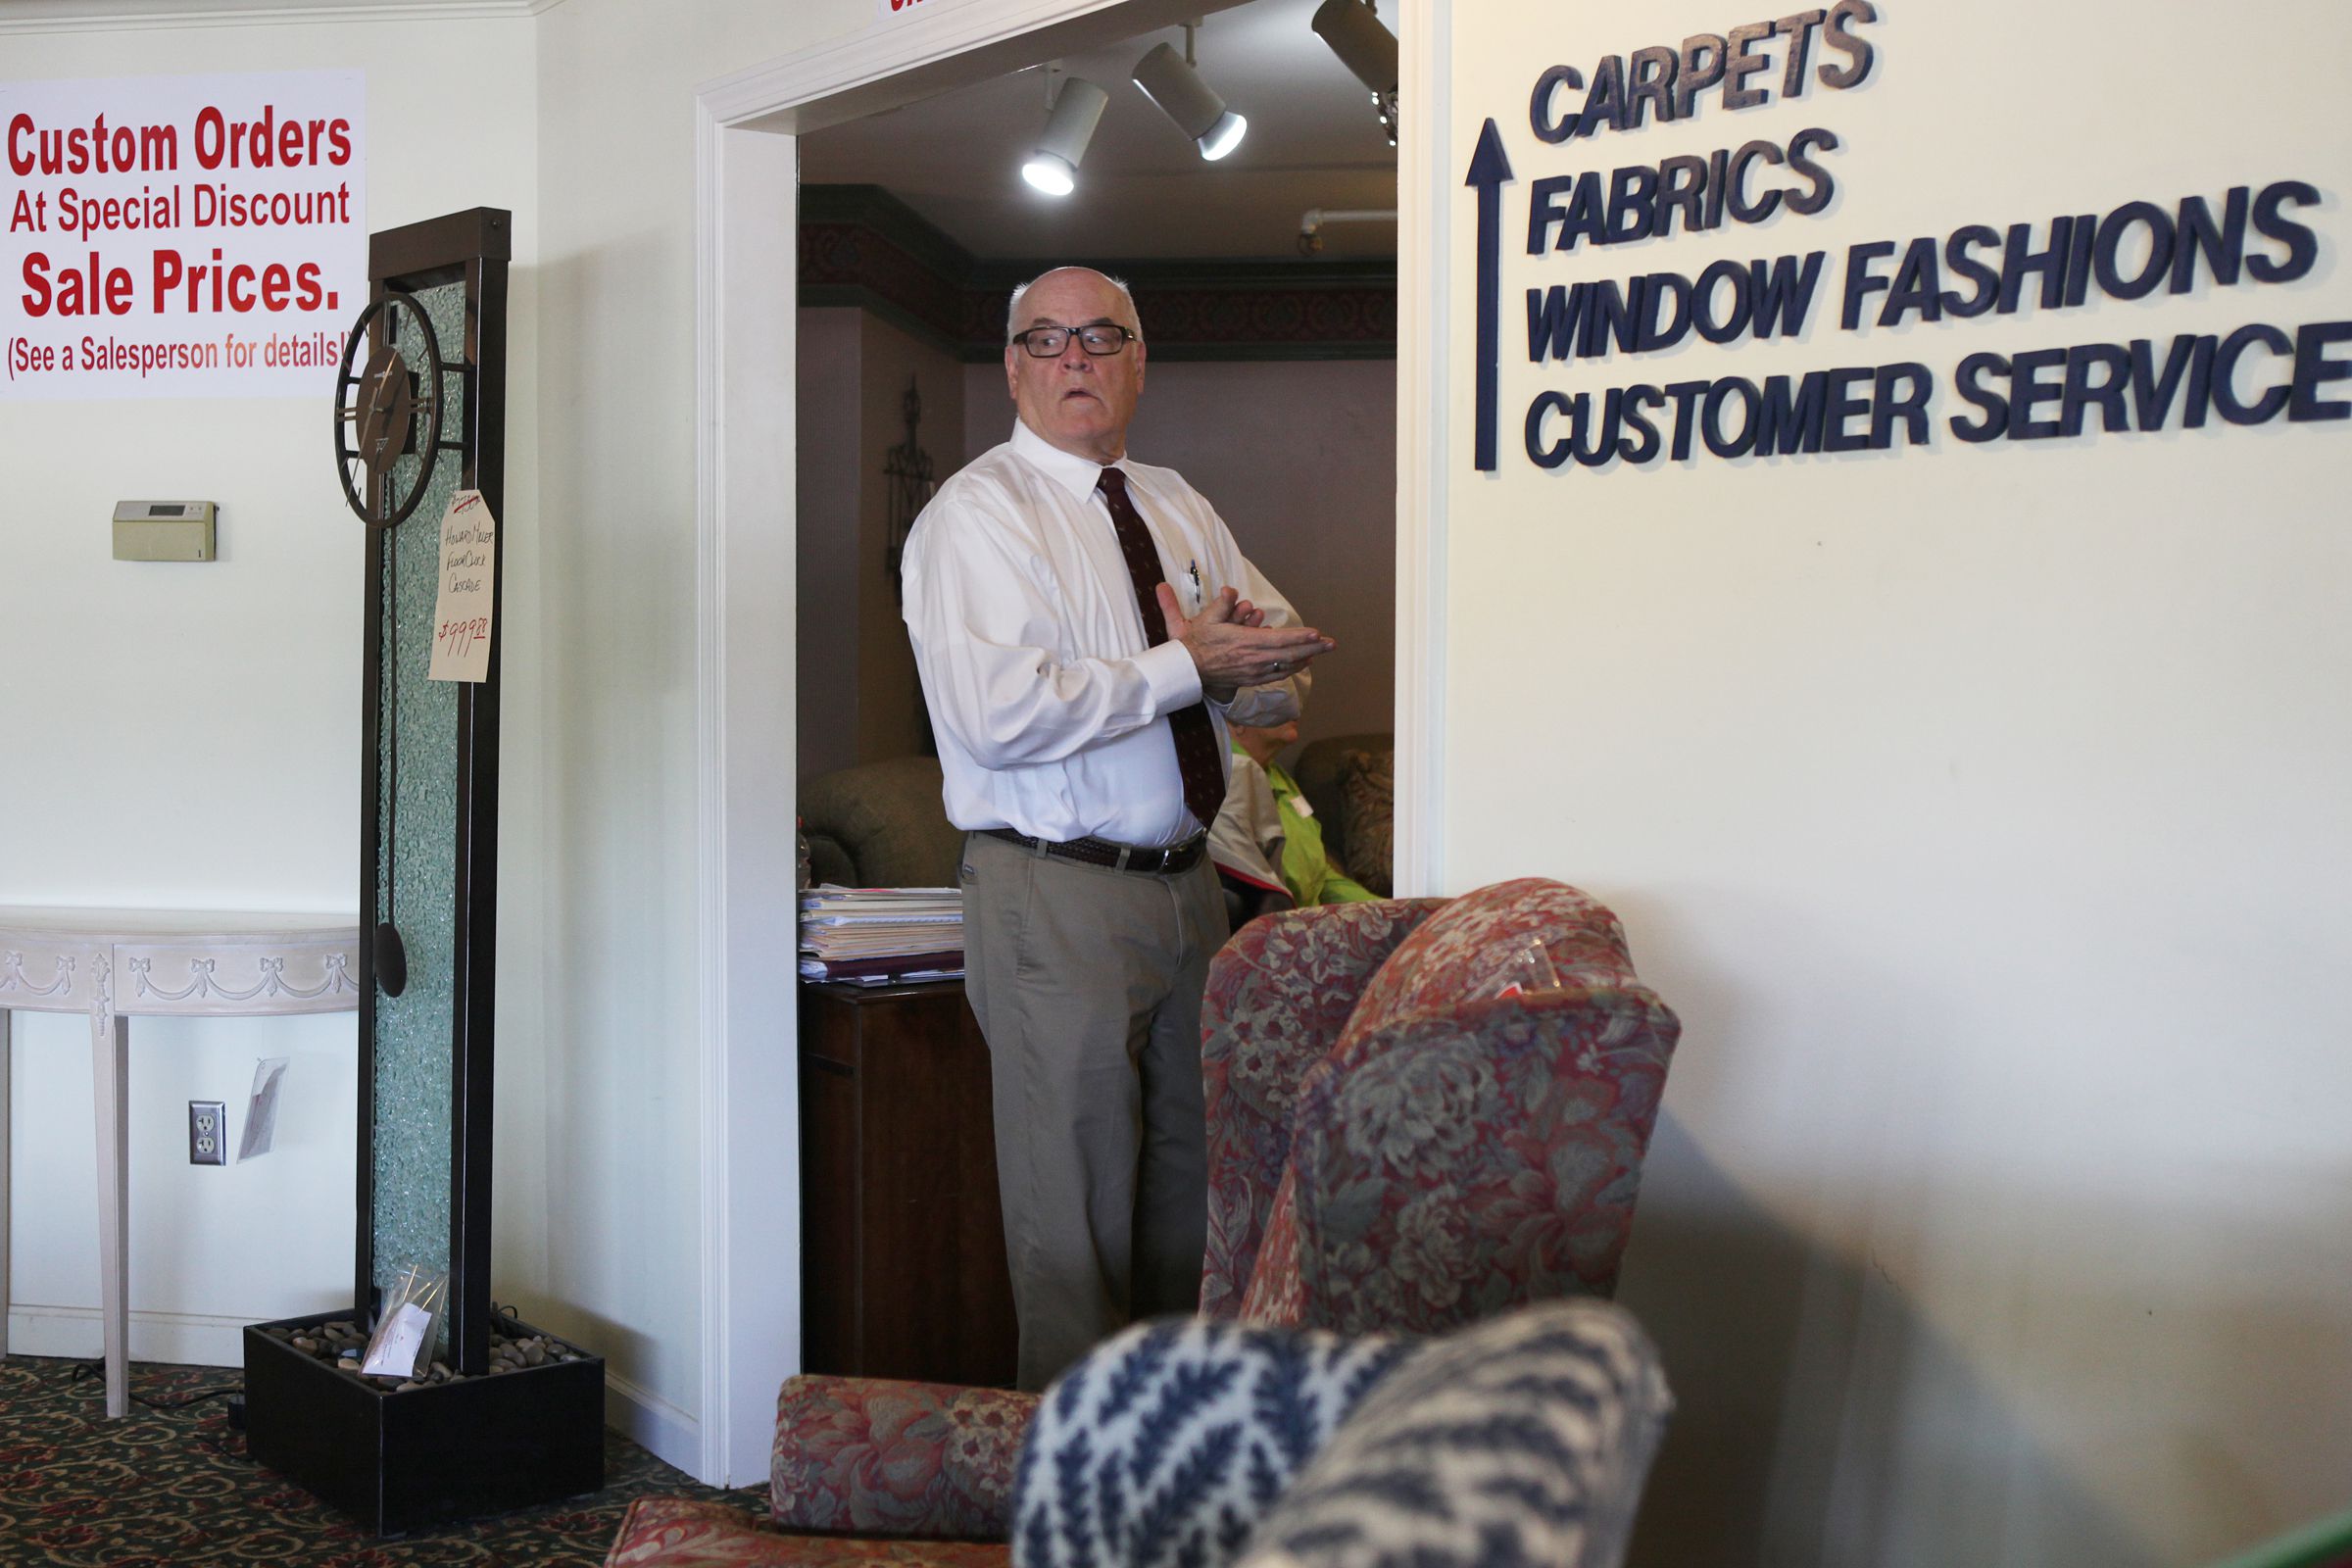 Dan Rutledge checks the main showroom at Bridgman's Furniture on Friday, May 12, 2017, in Lebanon, N.H. Bridgman's Furniture owner Steve Rutledge is retiring and selling his stake to his brother Dan, who will take over day-to-day operations. (Valley News - Jovelle Tamayo) Copyright Valley News. May not be reprinted or used online without permission. Send requests to permission@vnews.com.